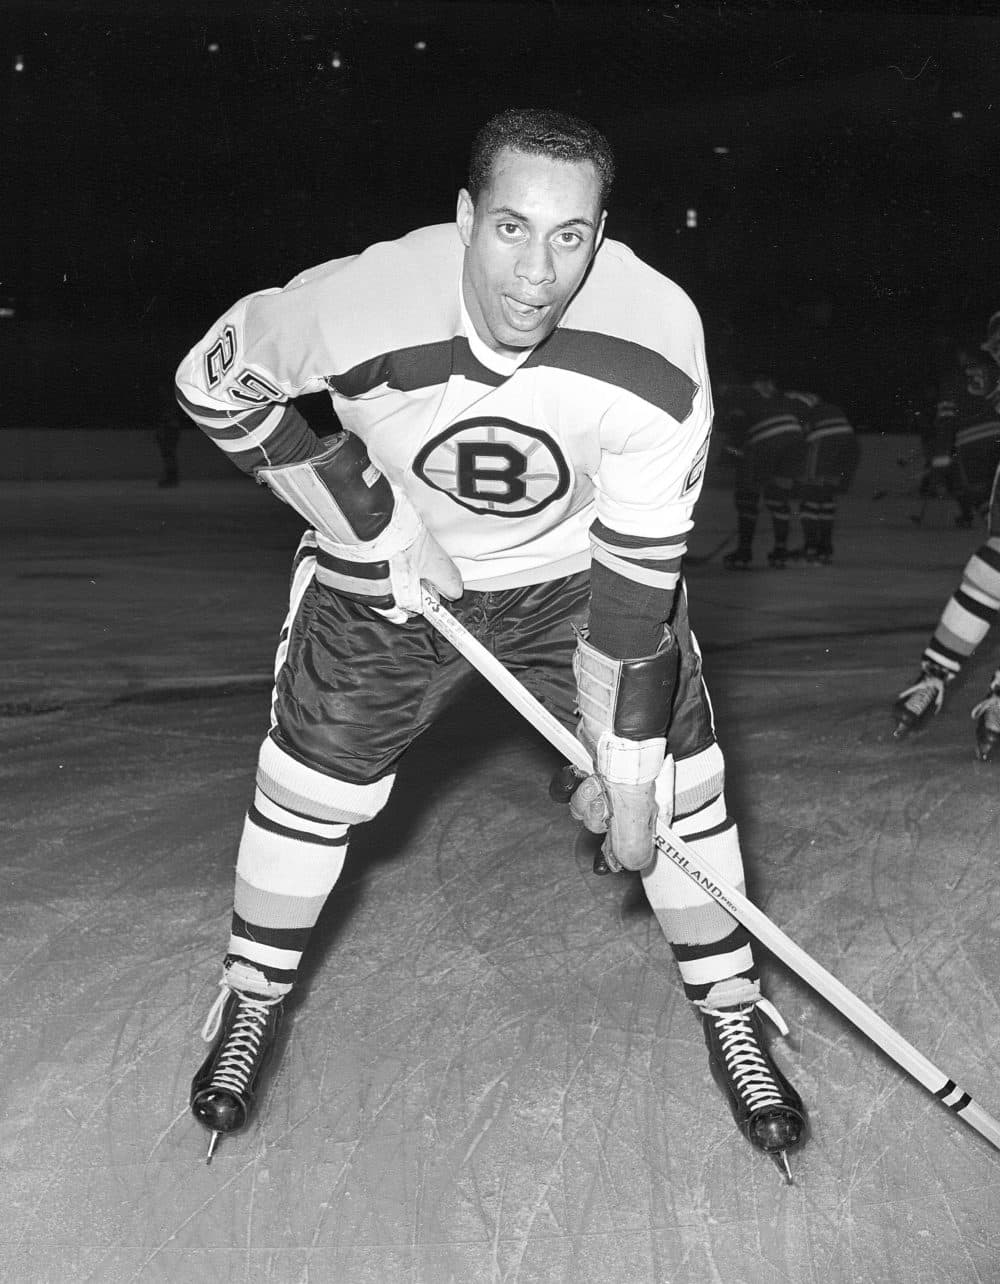 In this Nov. 23, 1960, file photo, 25-year-old left wing Willie O'Ree, the first black player of the National Hockey League, poses for a photo as he warms up in his Boston Bruins uniform prior to an NHL game with the New York Rangers at New York's Madison Square Garden. O'Ree was selected to the Hockey Hall of Fame on June 26, 2018. (AP)